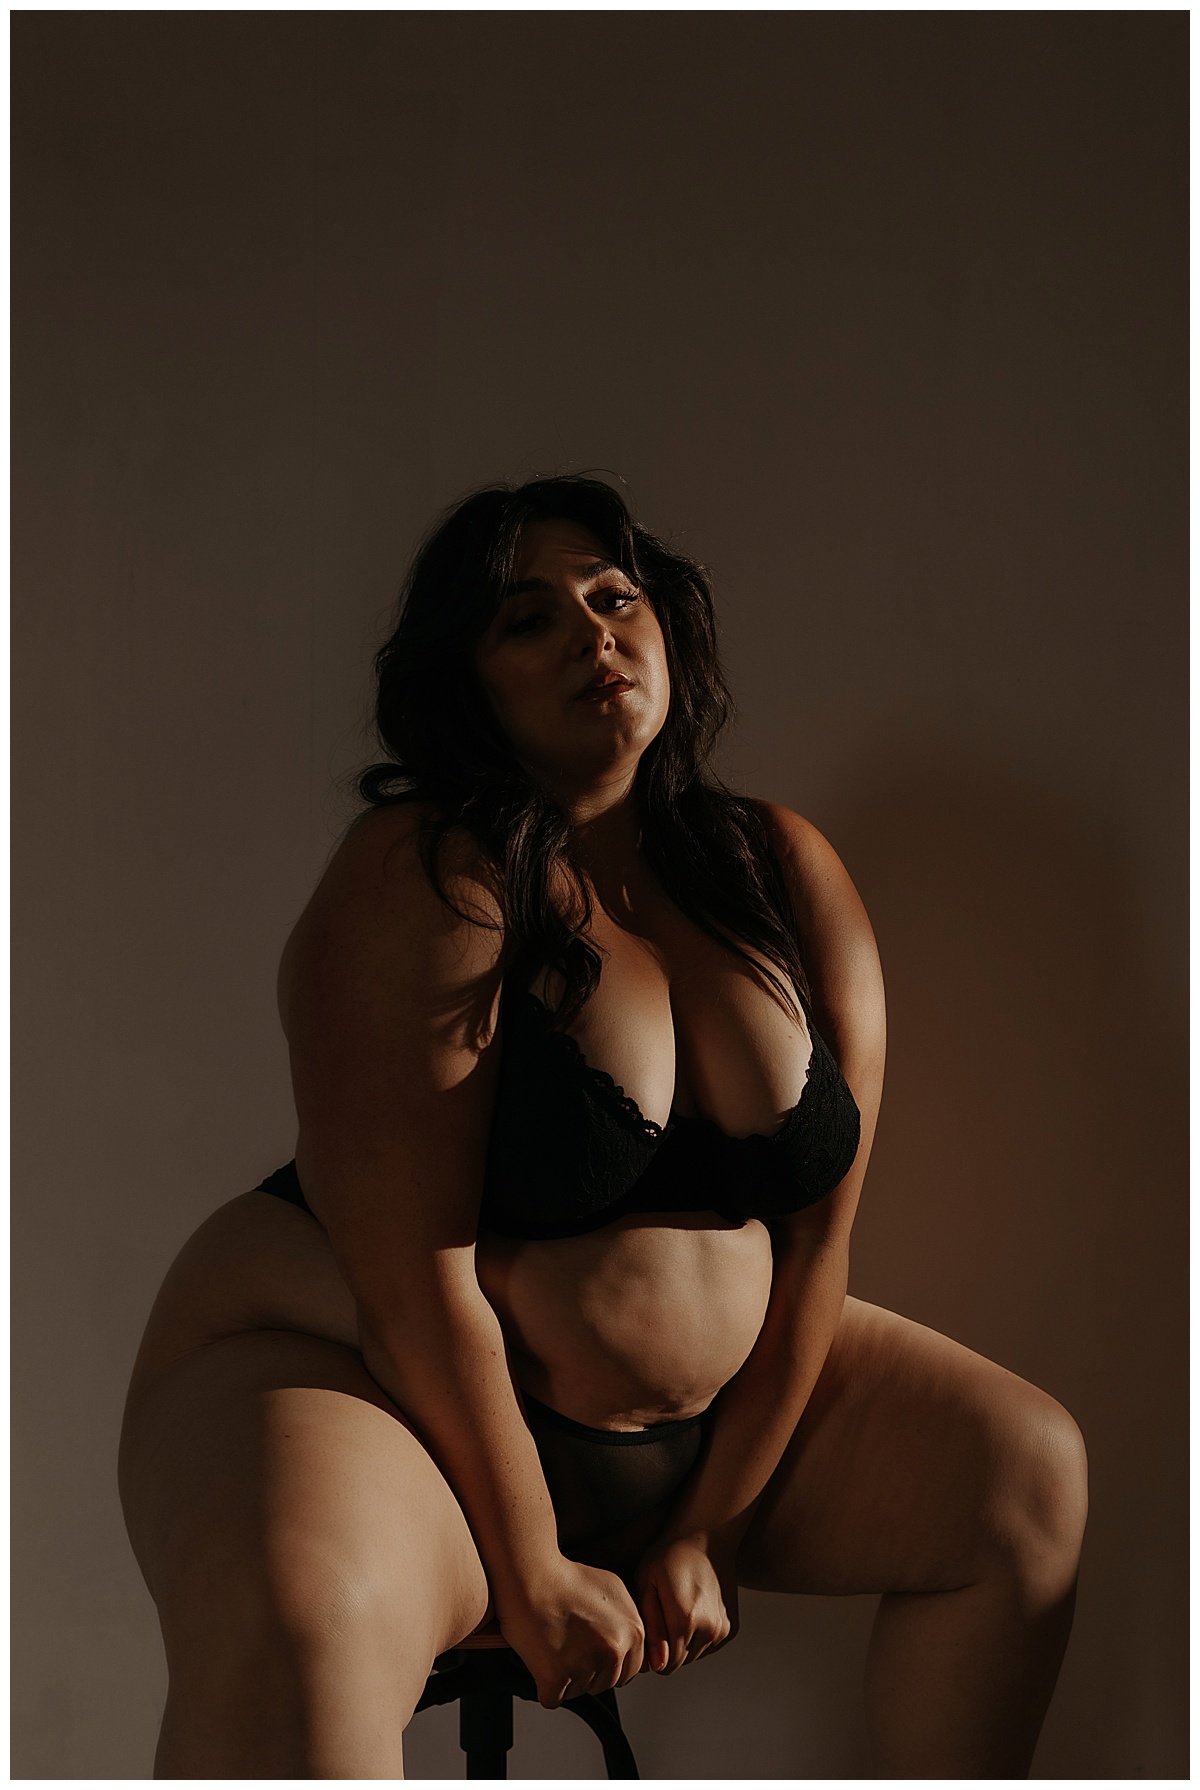 Woman sits on the stool and leans forward wearing lingerie in the Studio Lighting